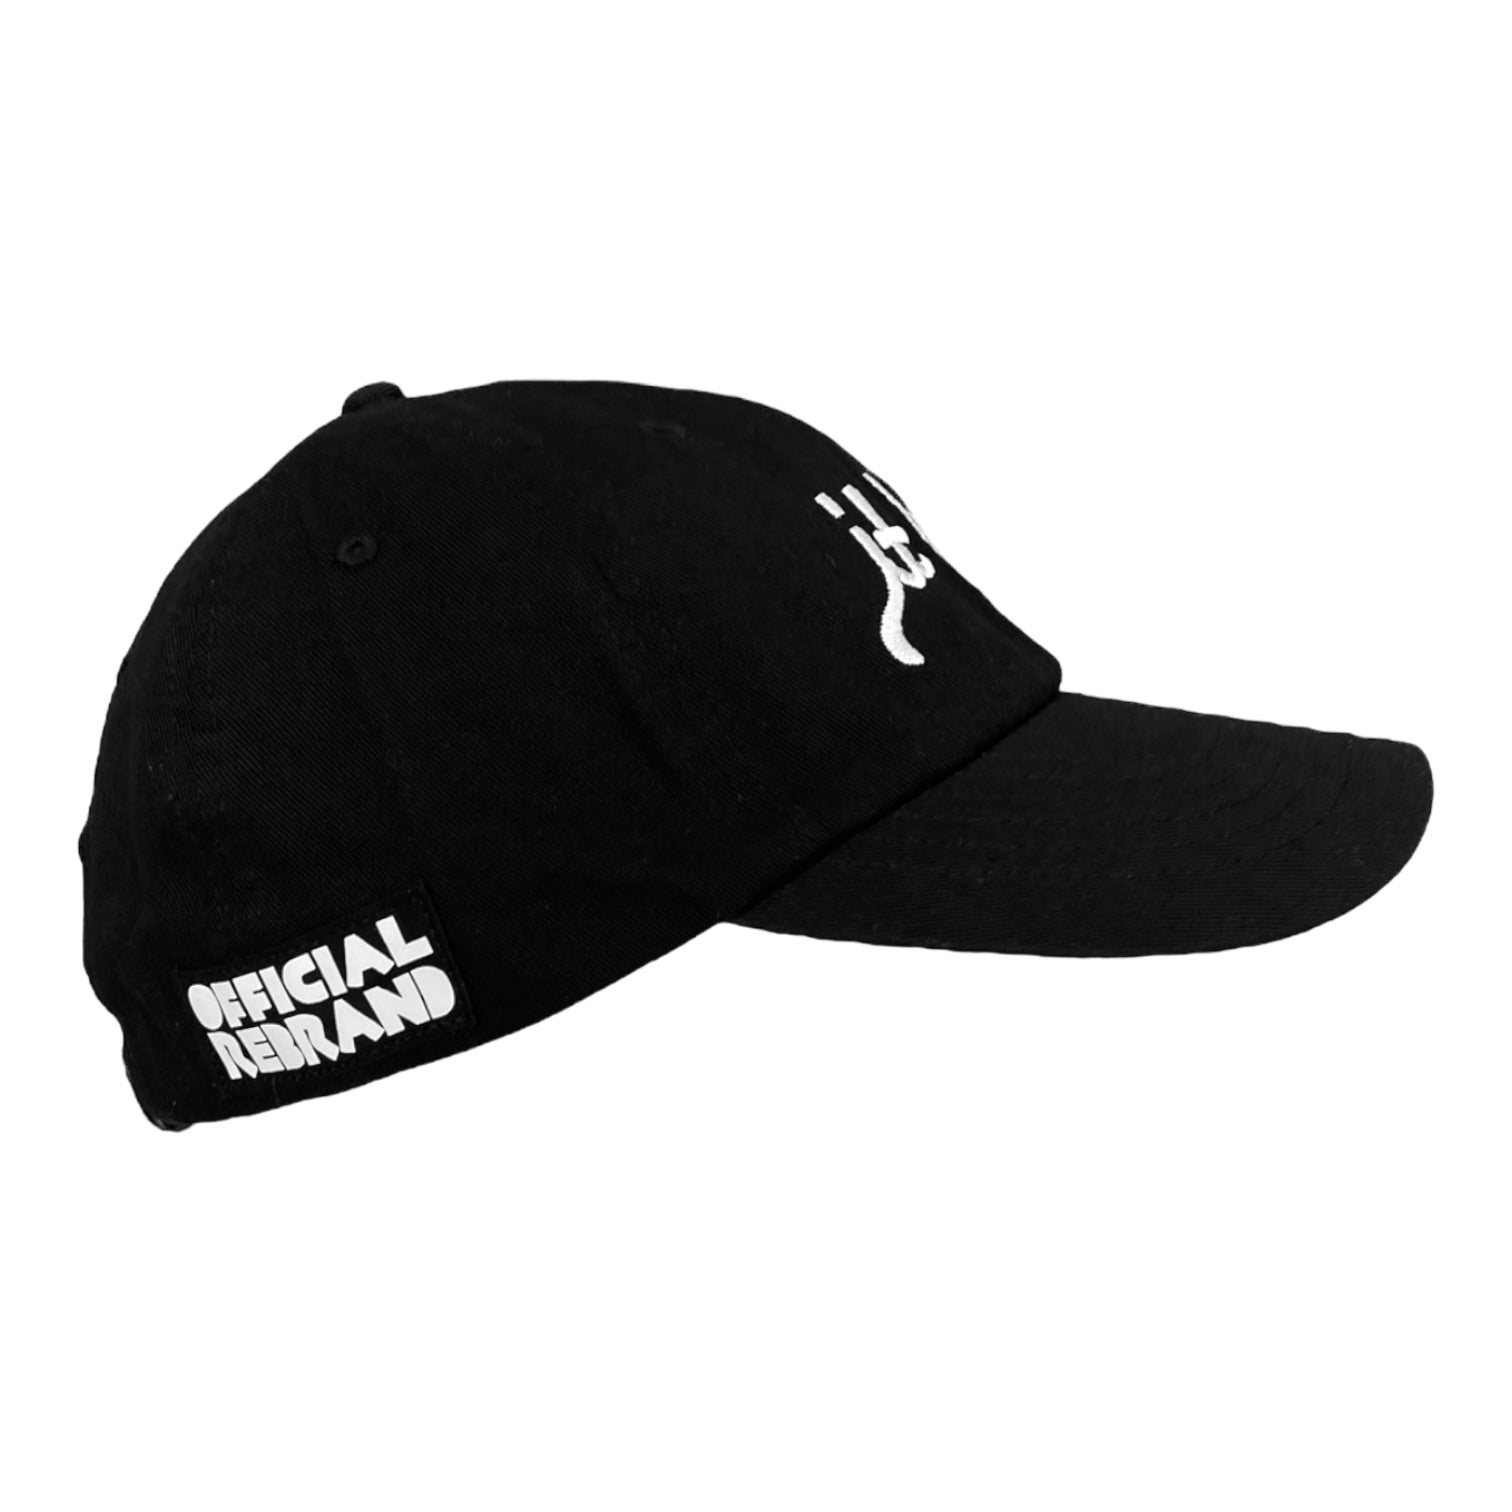 side view of black baseball cap with white embroidery reading it boy in cursive text across the front and white OFFICIAL REBRAND logo on the side